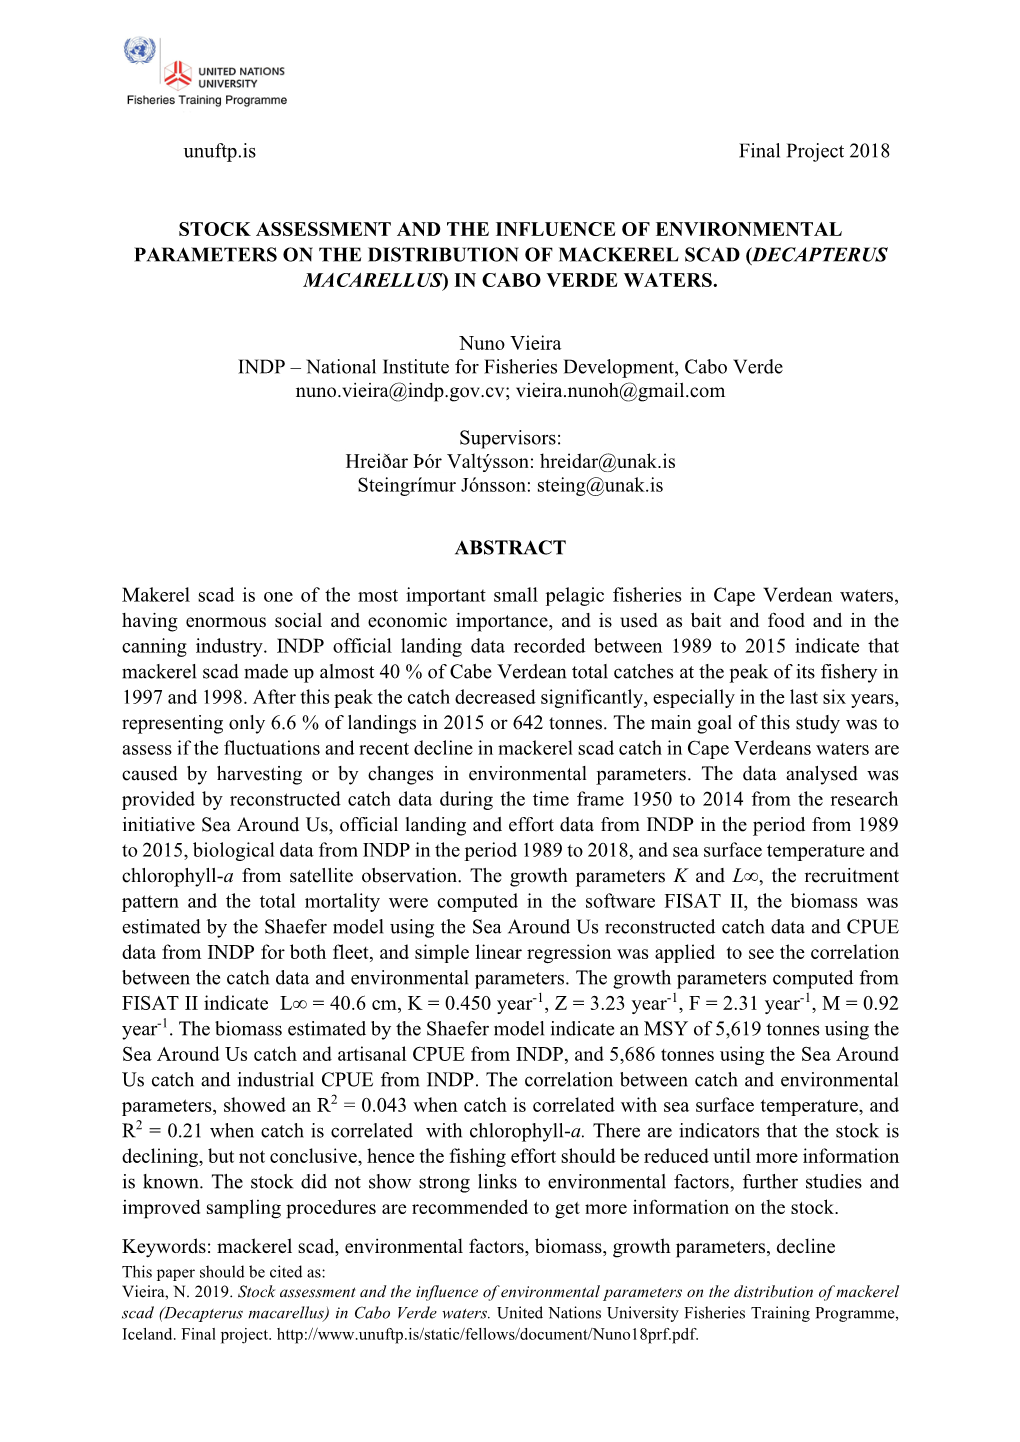 Stock Assessment and the Influence of Environmental Parameters on the Distribution of Mackerel Scad (Decapterus Macarellus) in Cabo Verde Waters